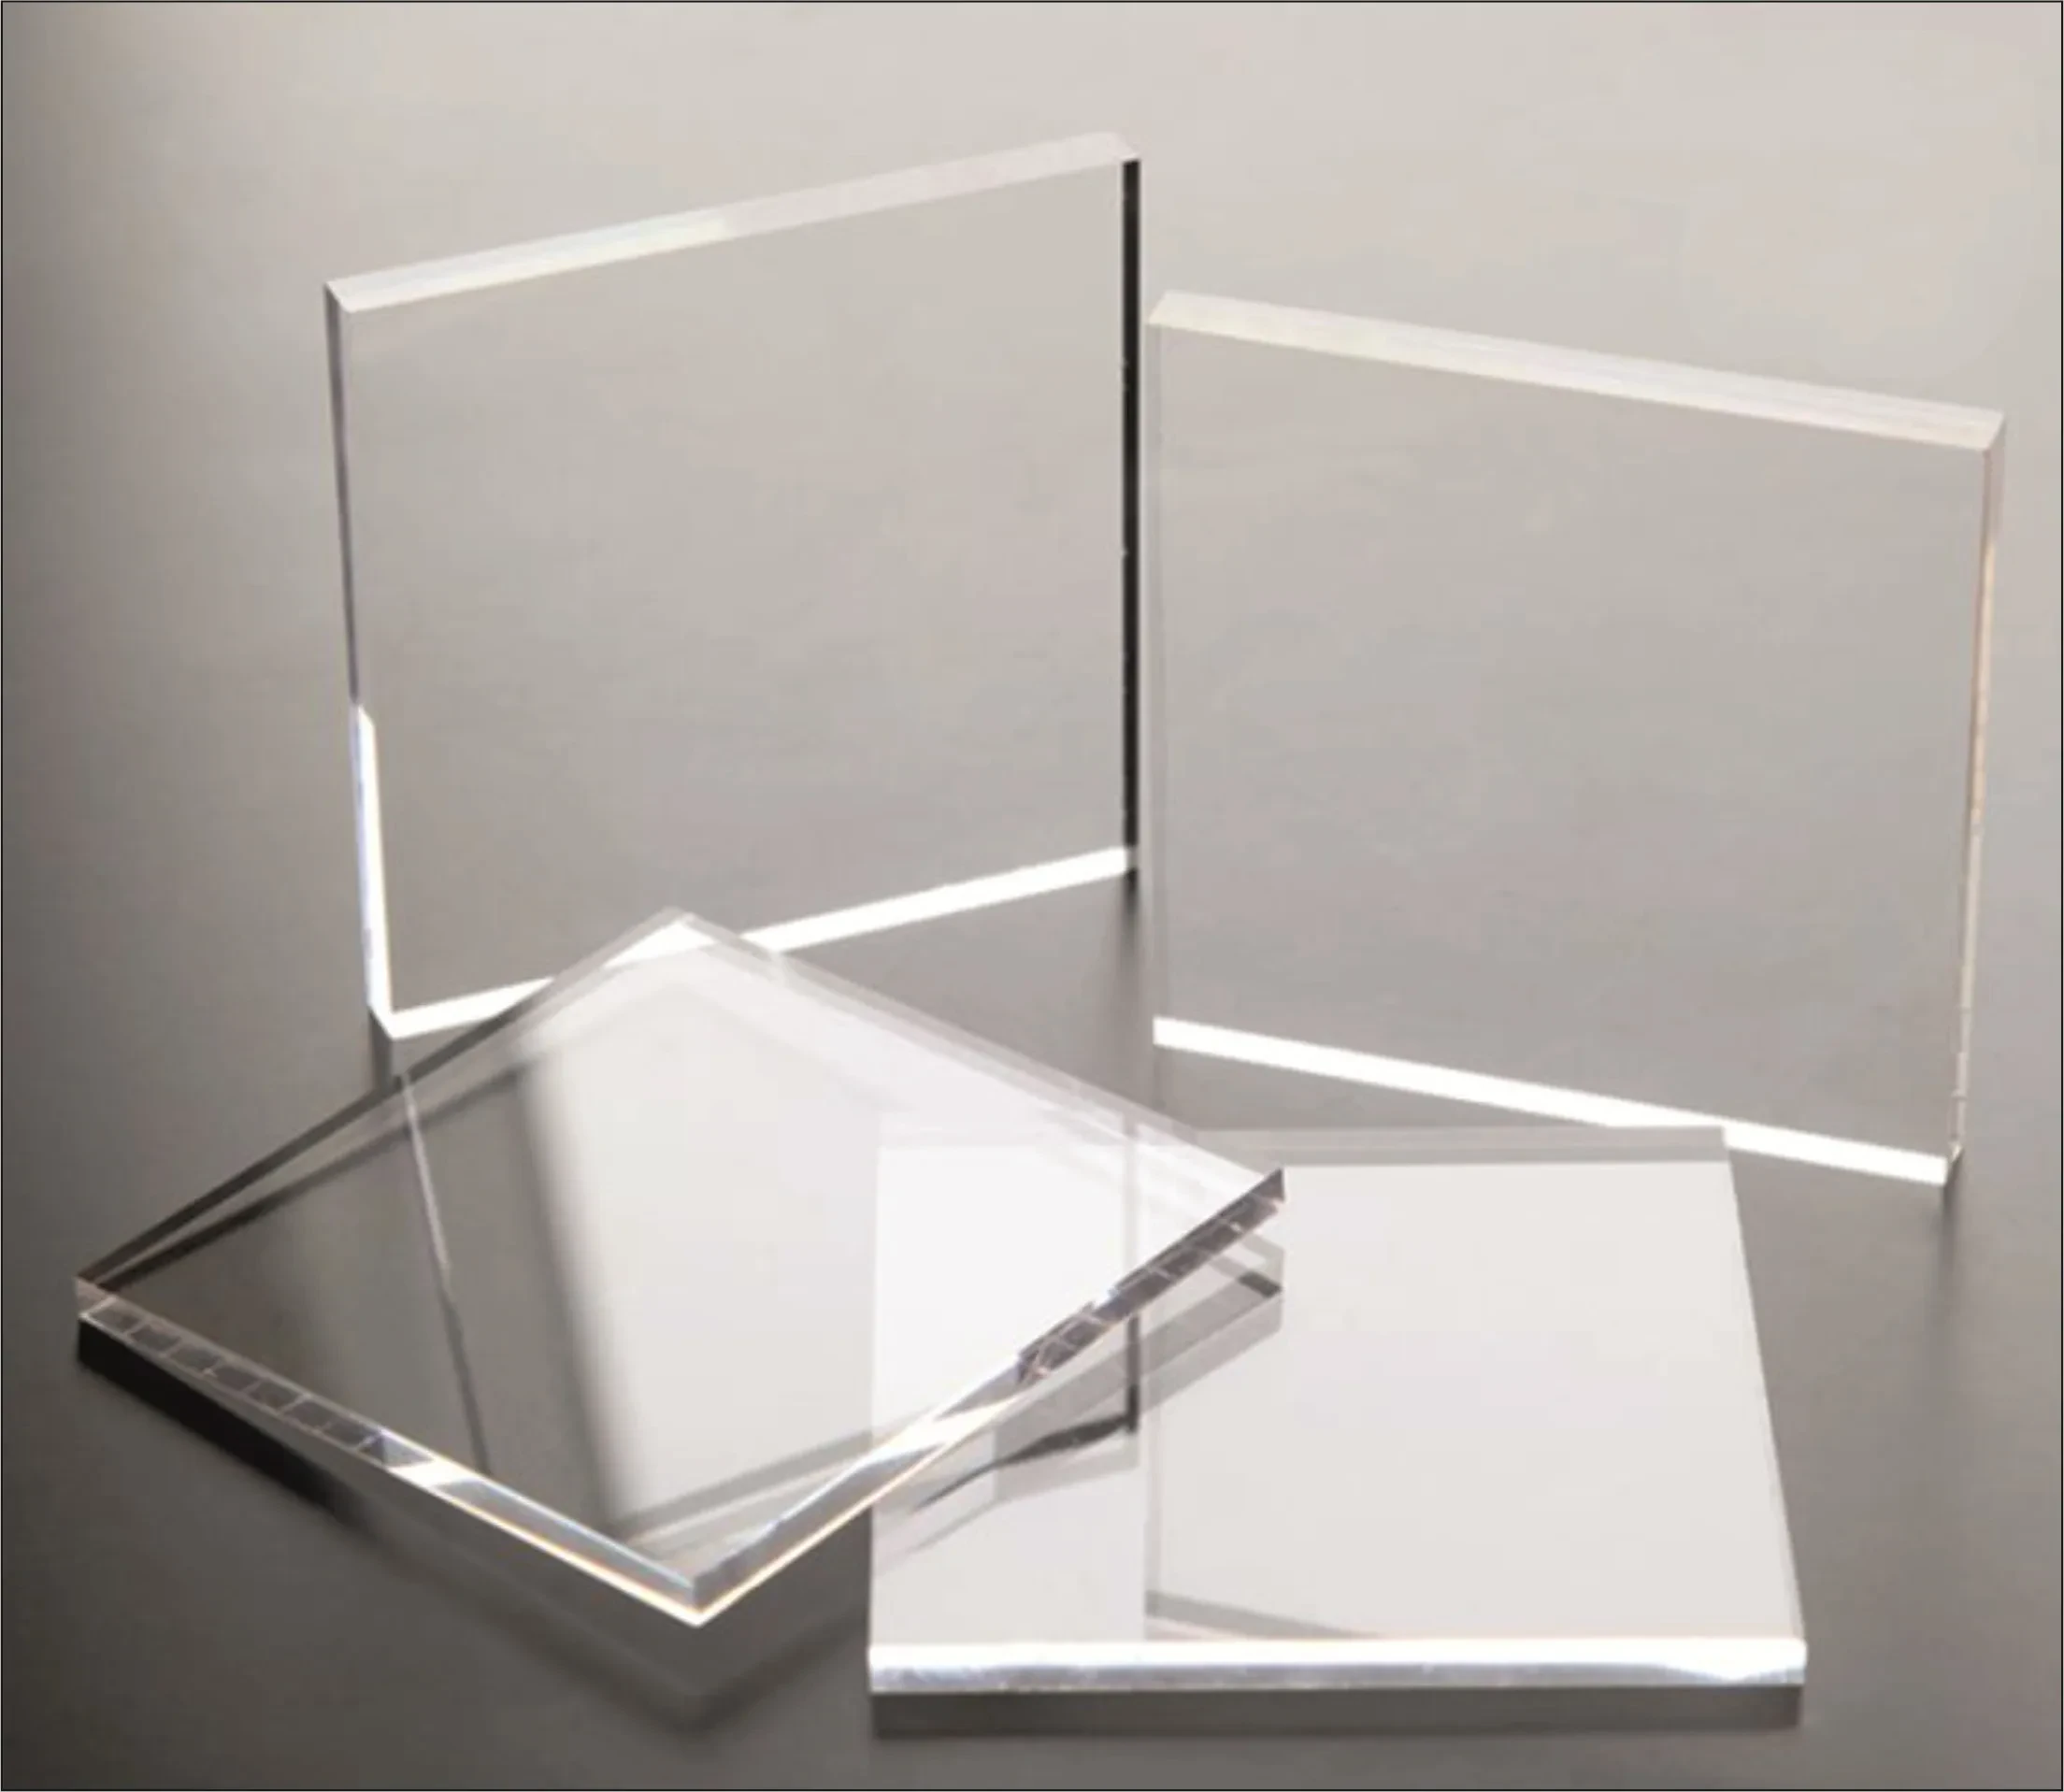 Partnering with an OEM Clear Acrylic Plastic Sheet Manufacturer for Custom Solutions